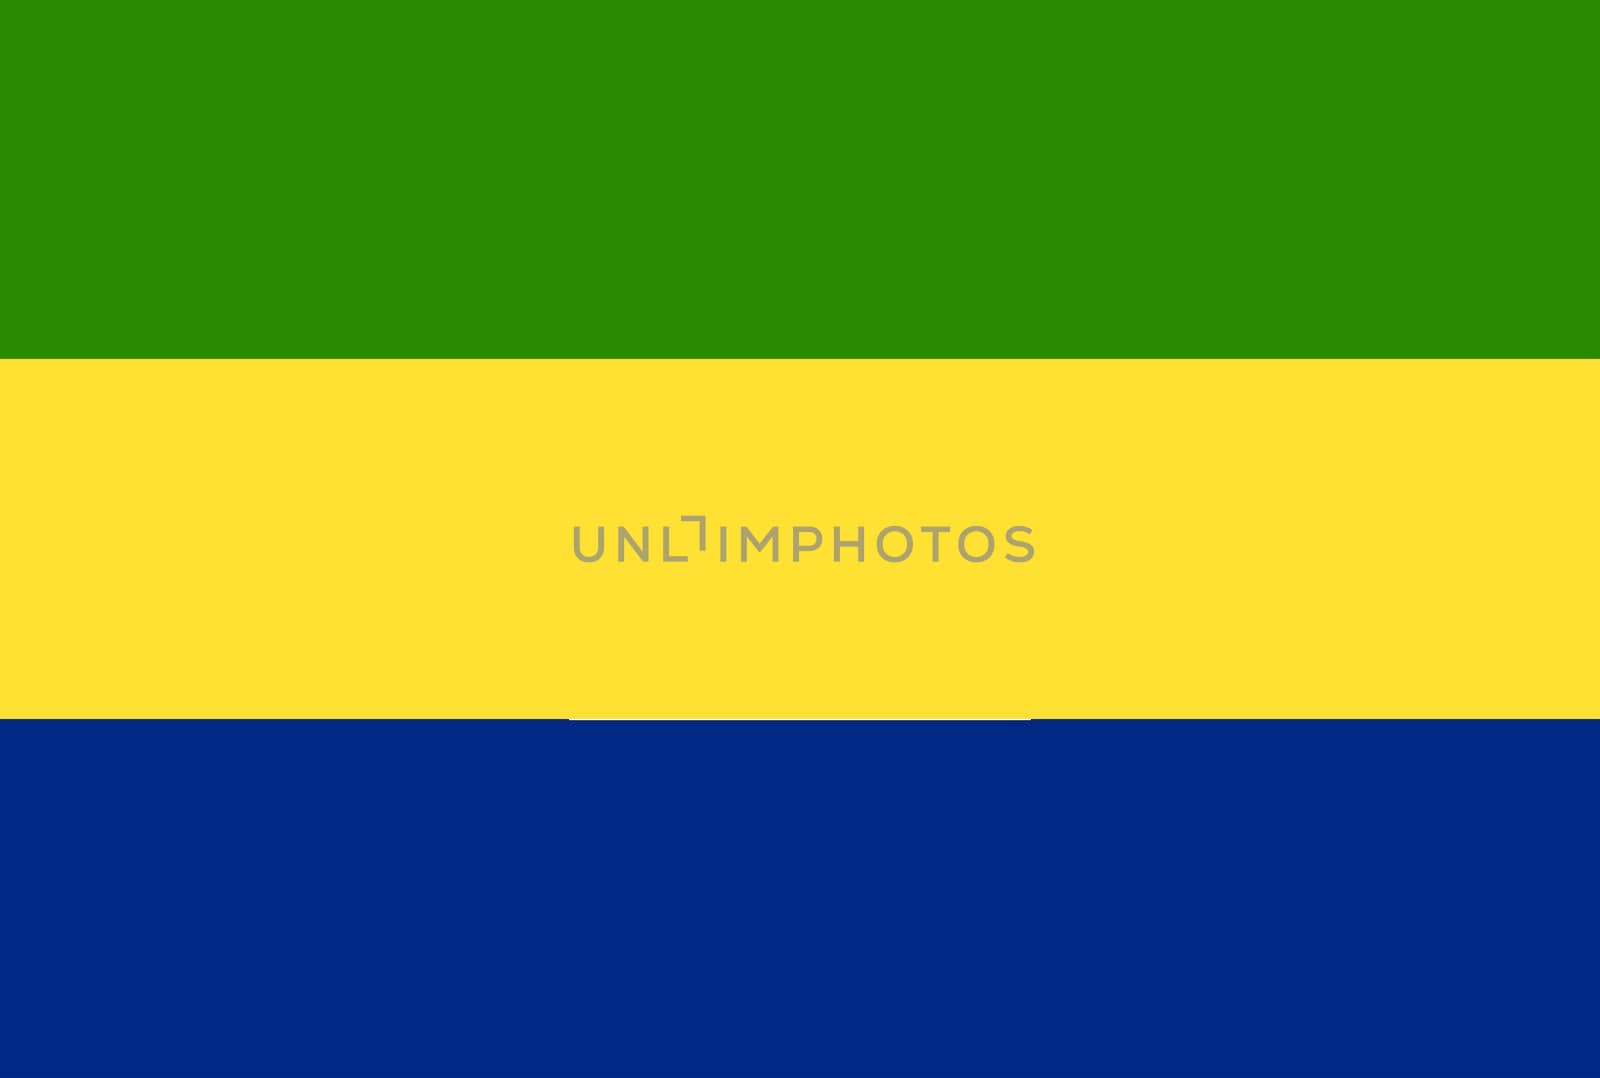 The flag of the African country of Gabon